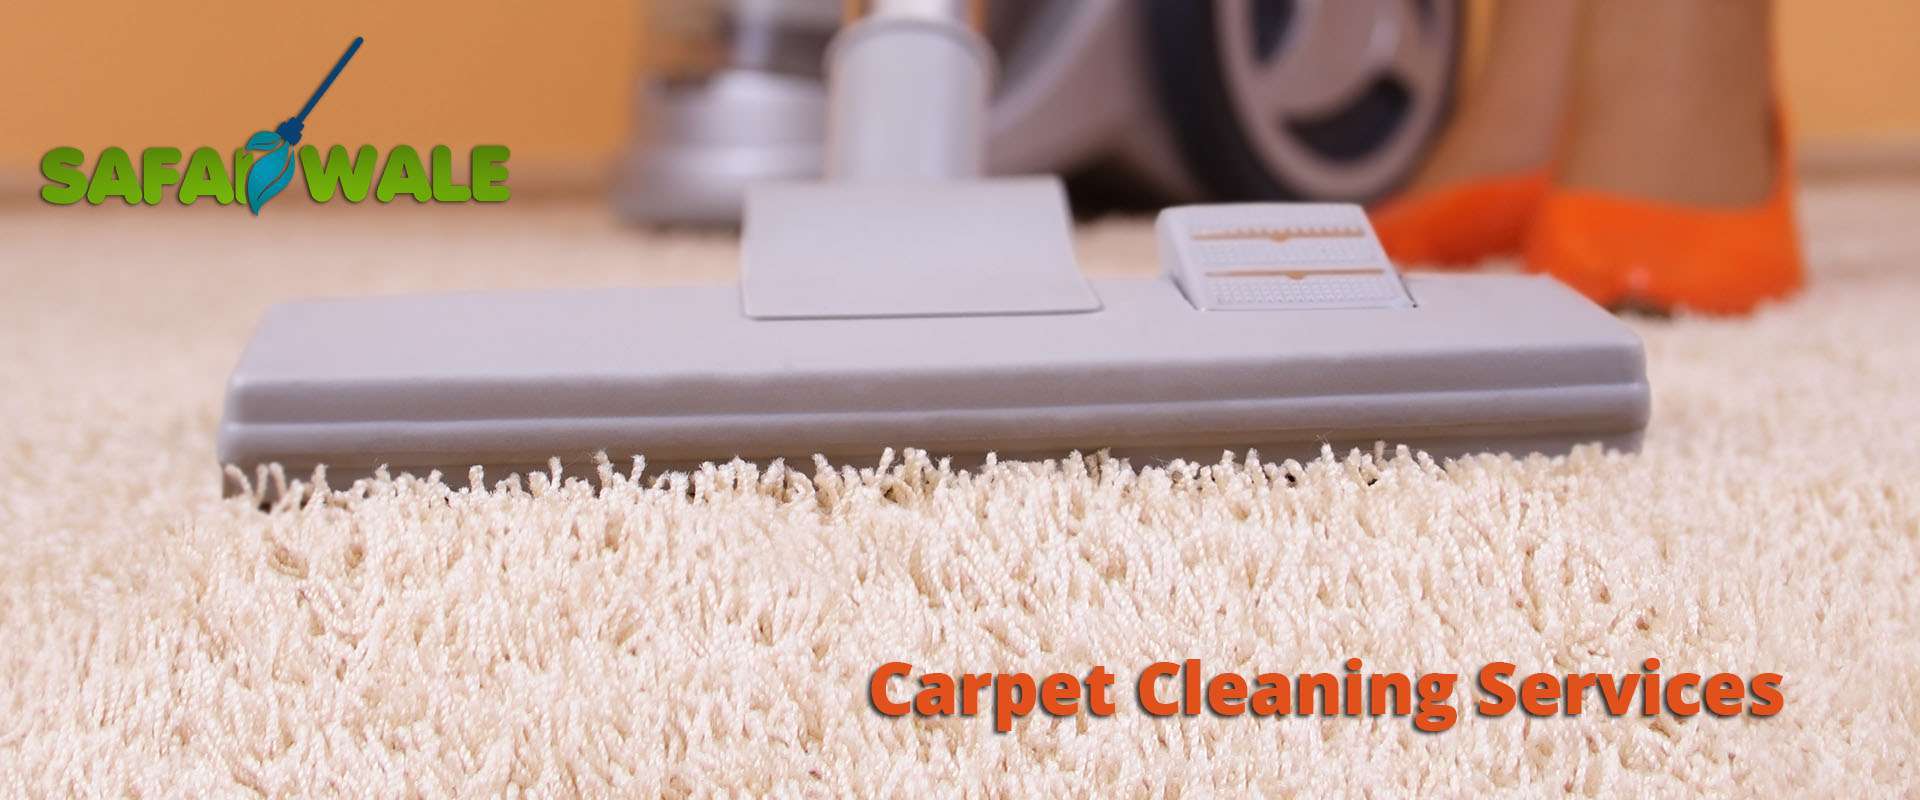 Carpet Cleaning Services In Barakhamba Road, New Delhi